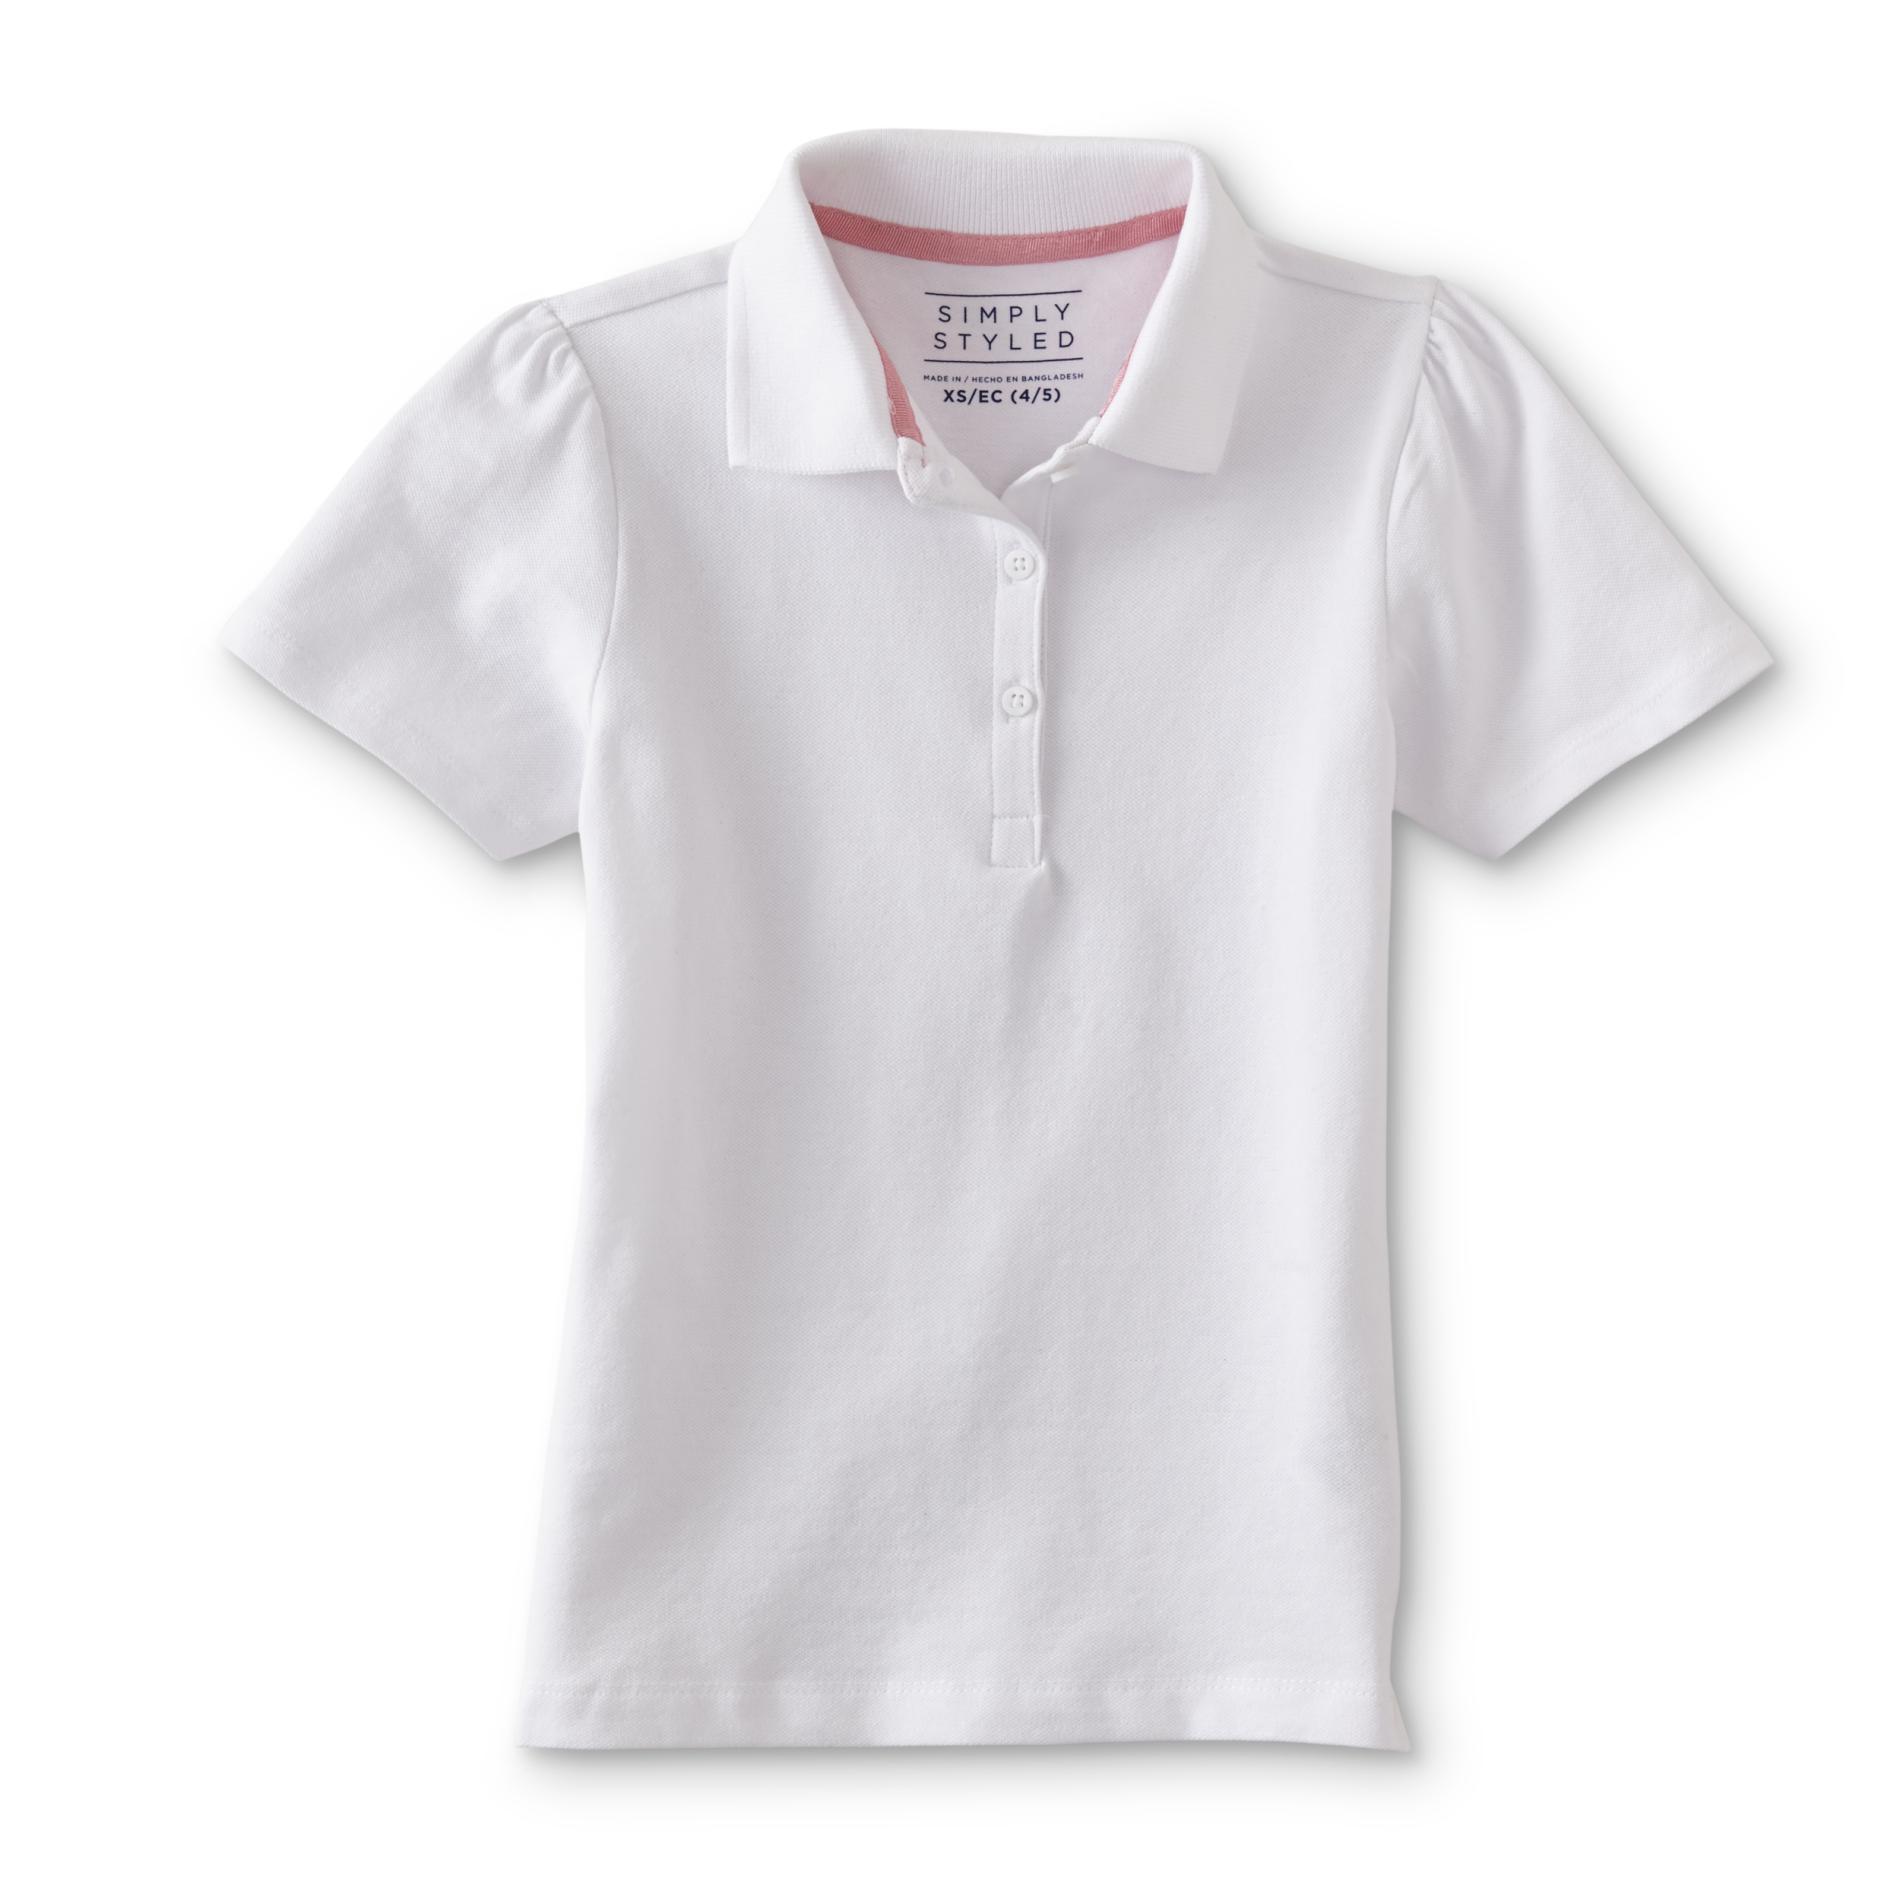 Simply Styled Girls' Short-Sleeve Polo